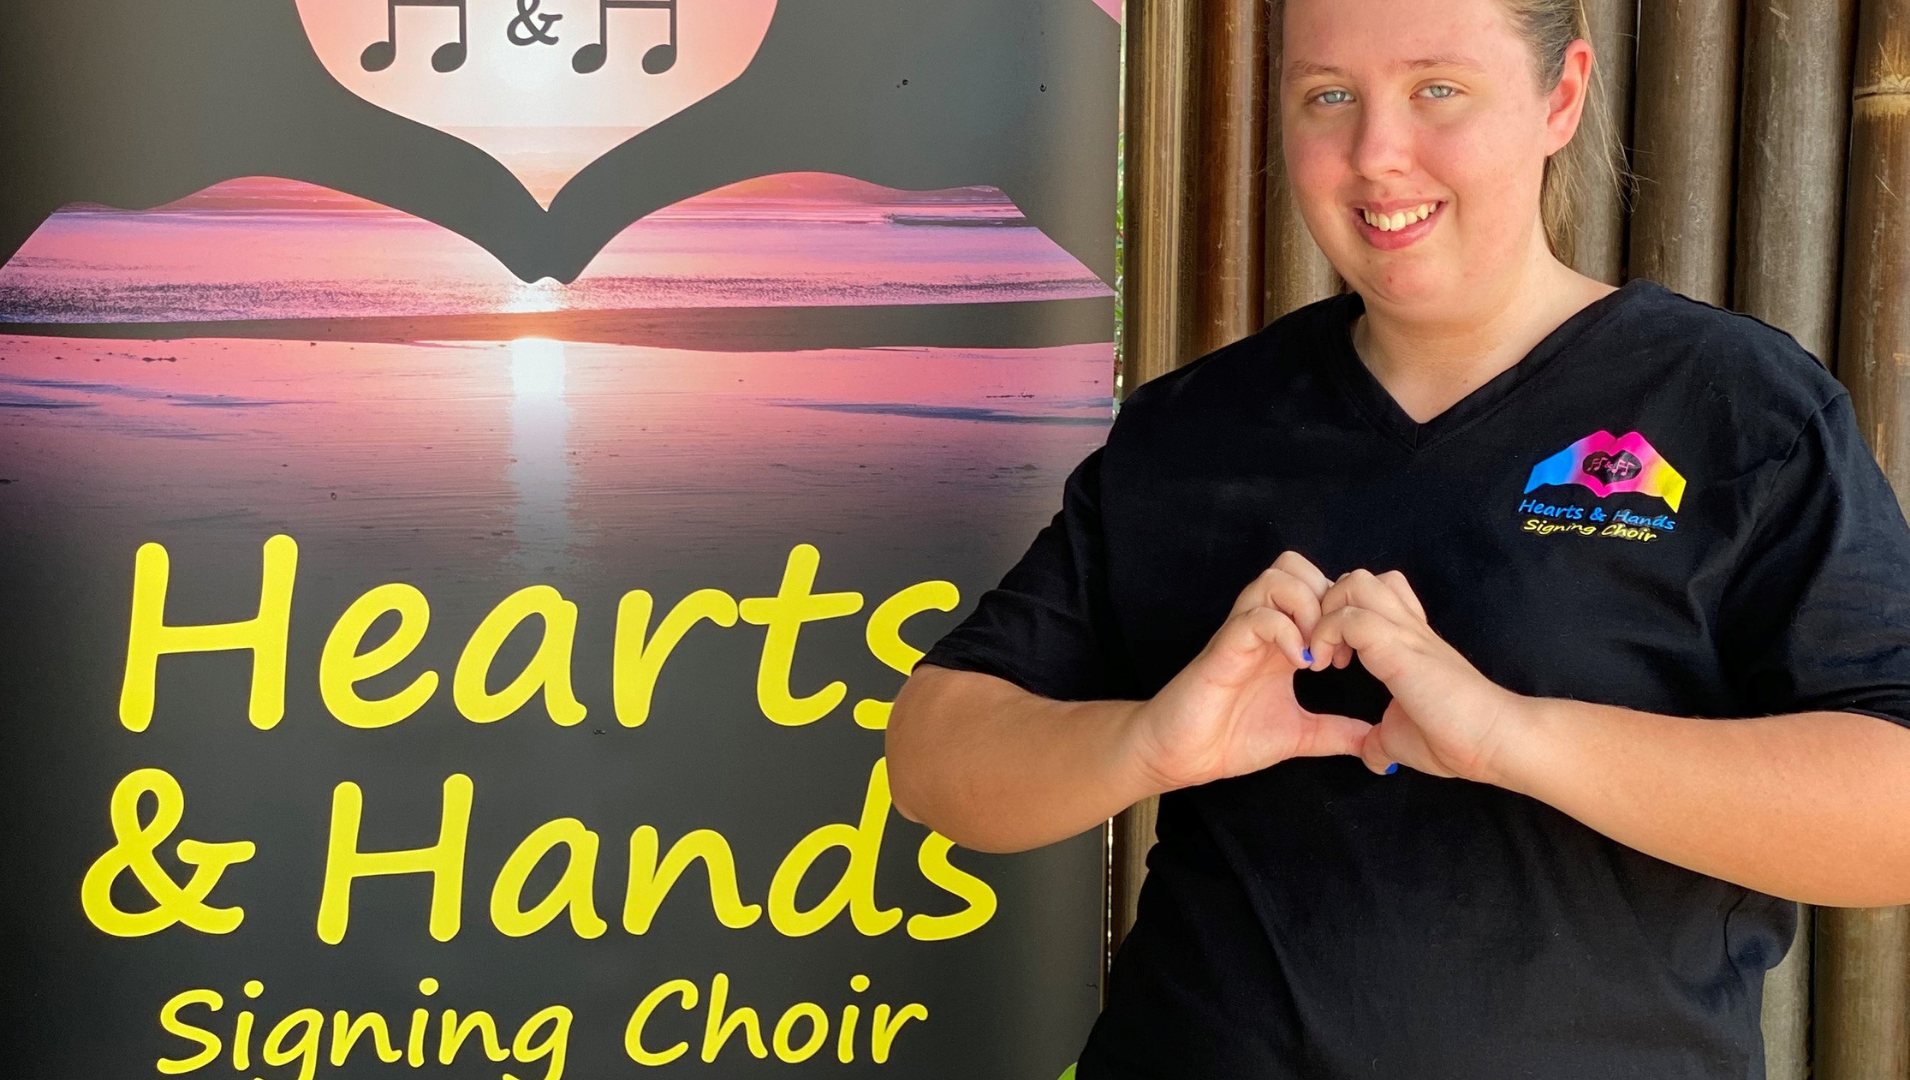 Xanthe standing beside a 'Hearts and Hands' banner, holding her hands in the shape of a heart